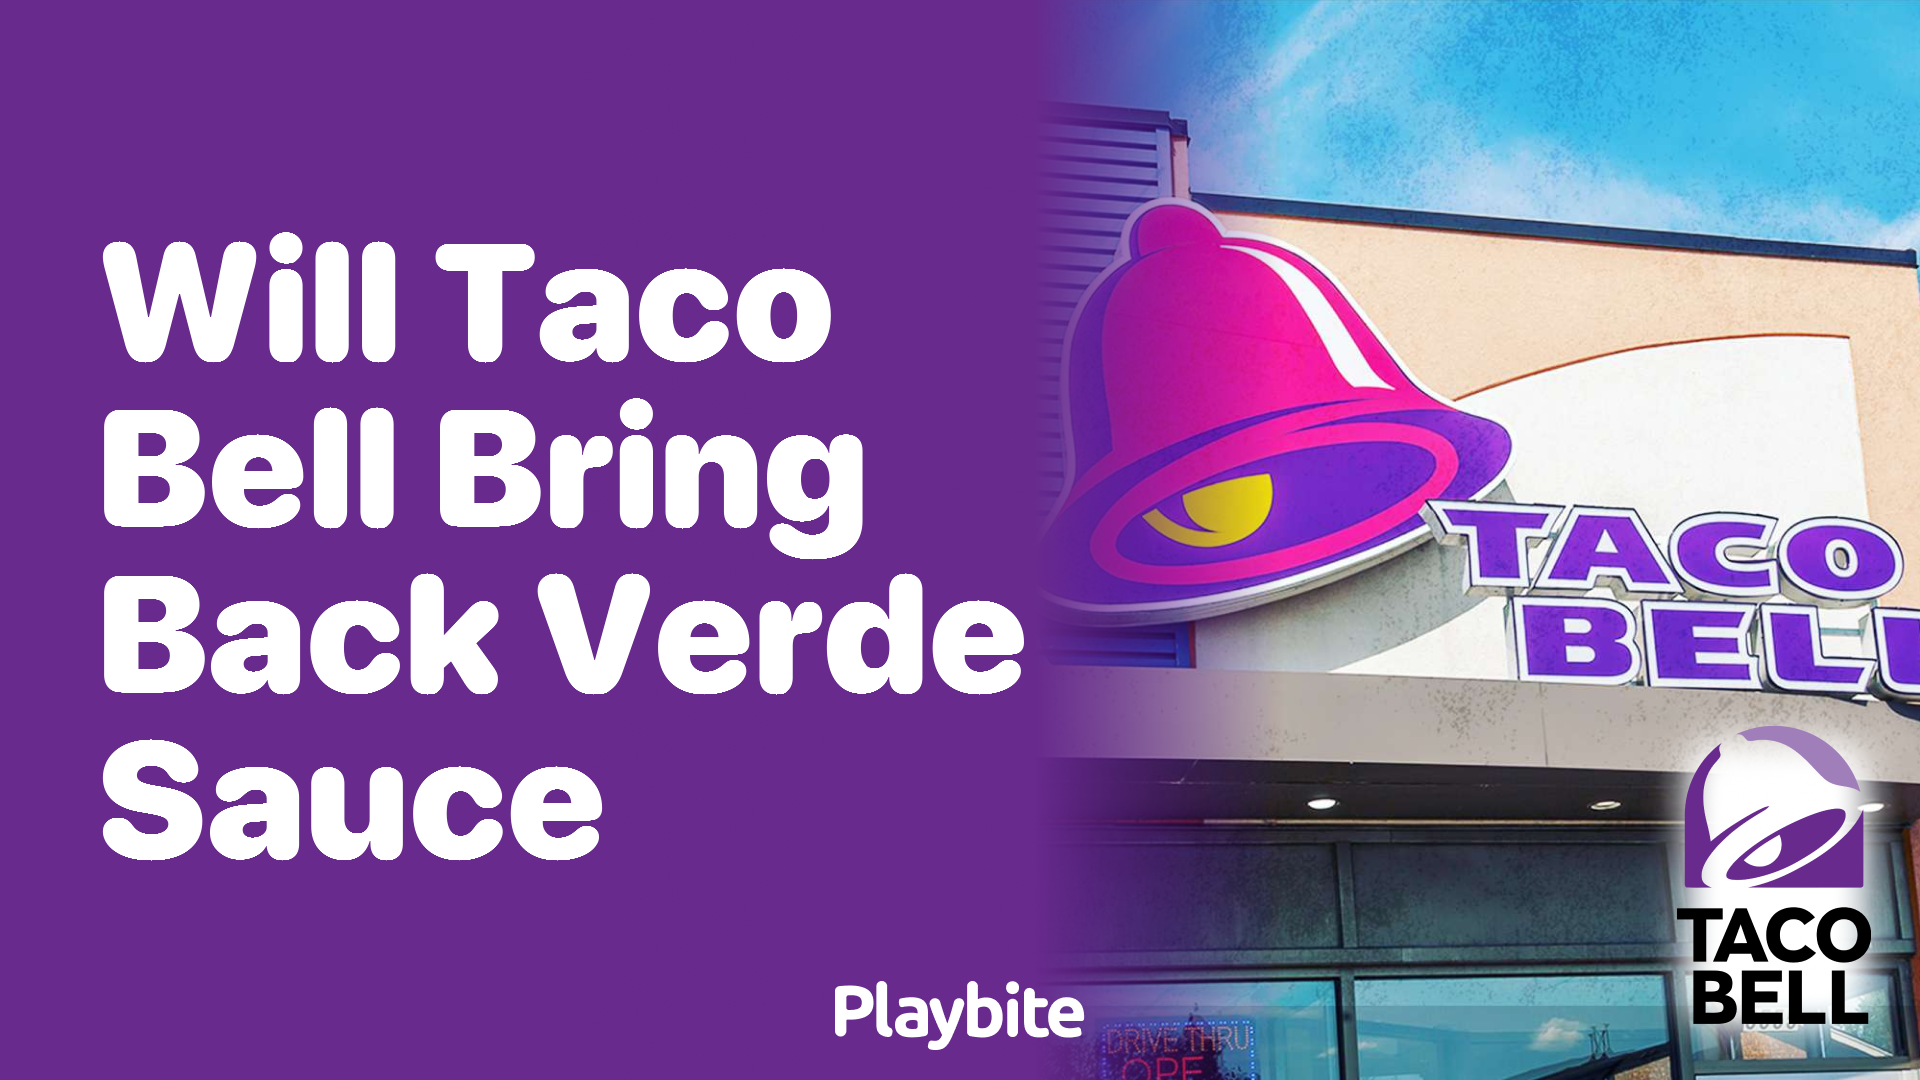 Will Taco Bell Bring Back Verde Sauce?